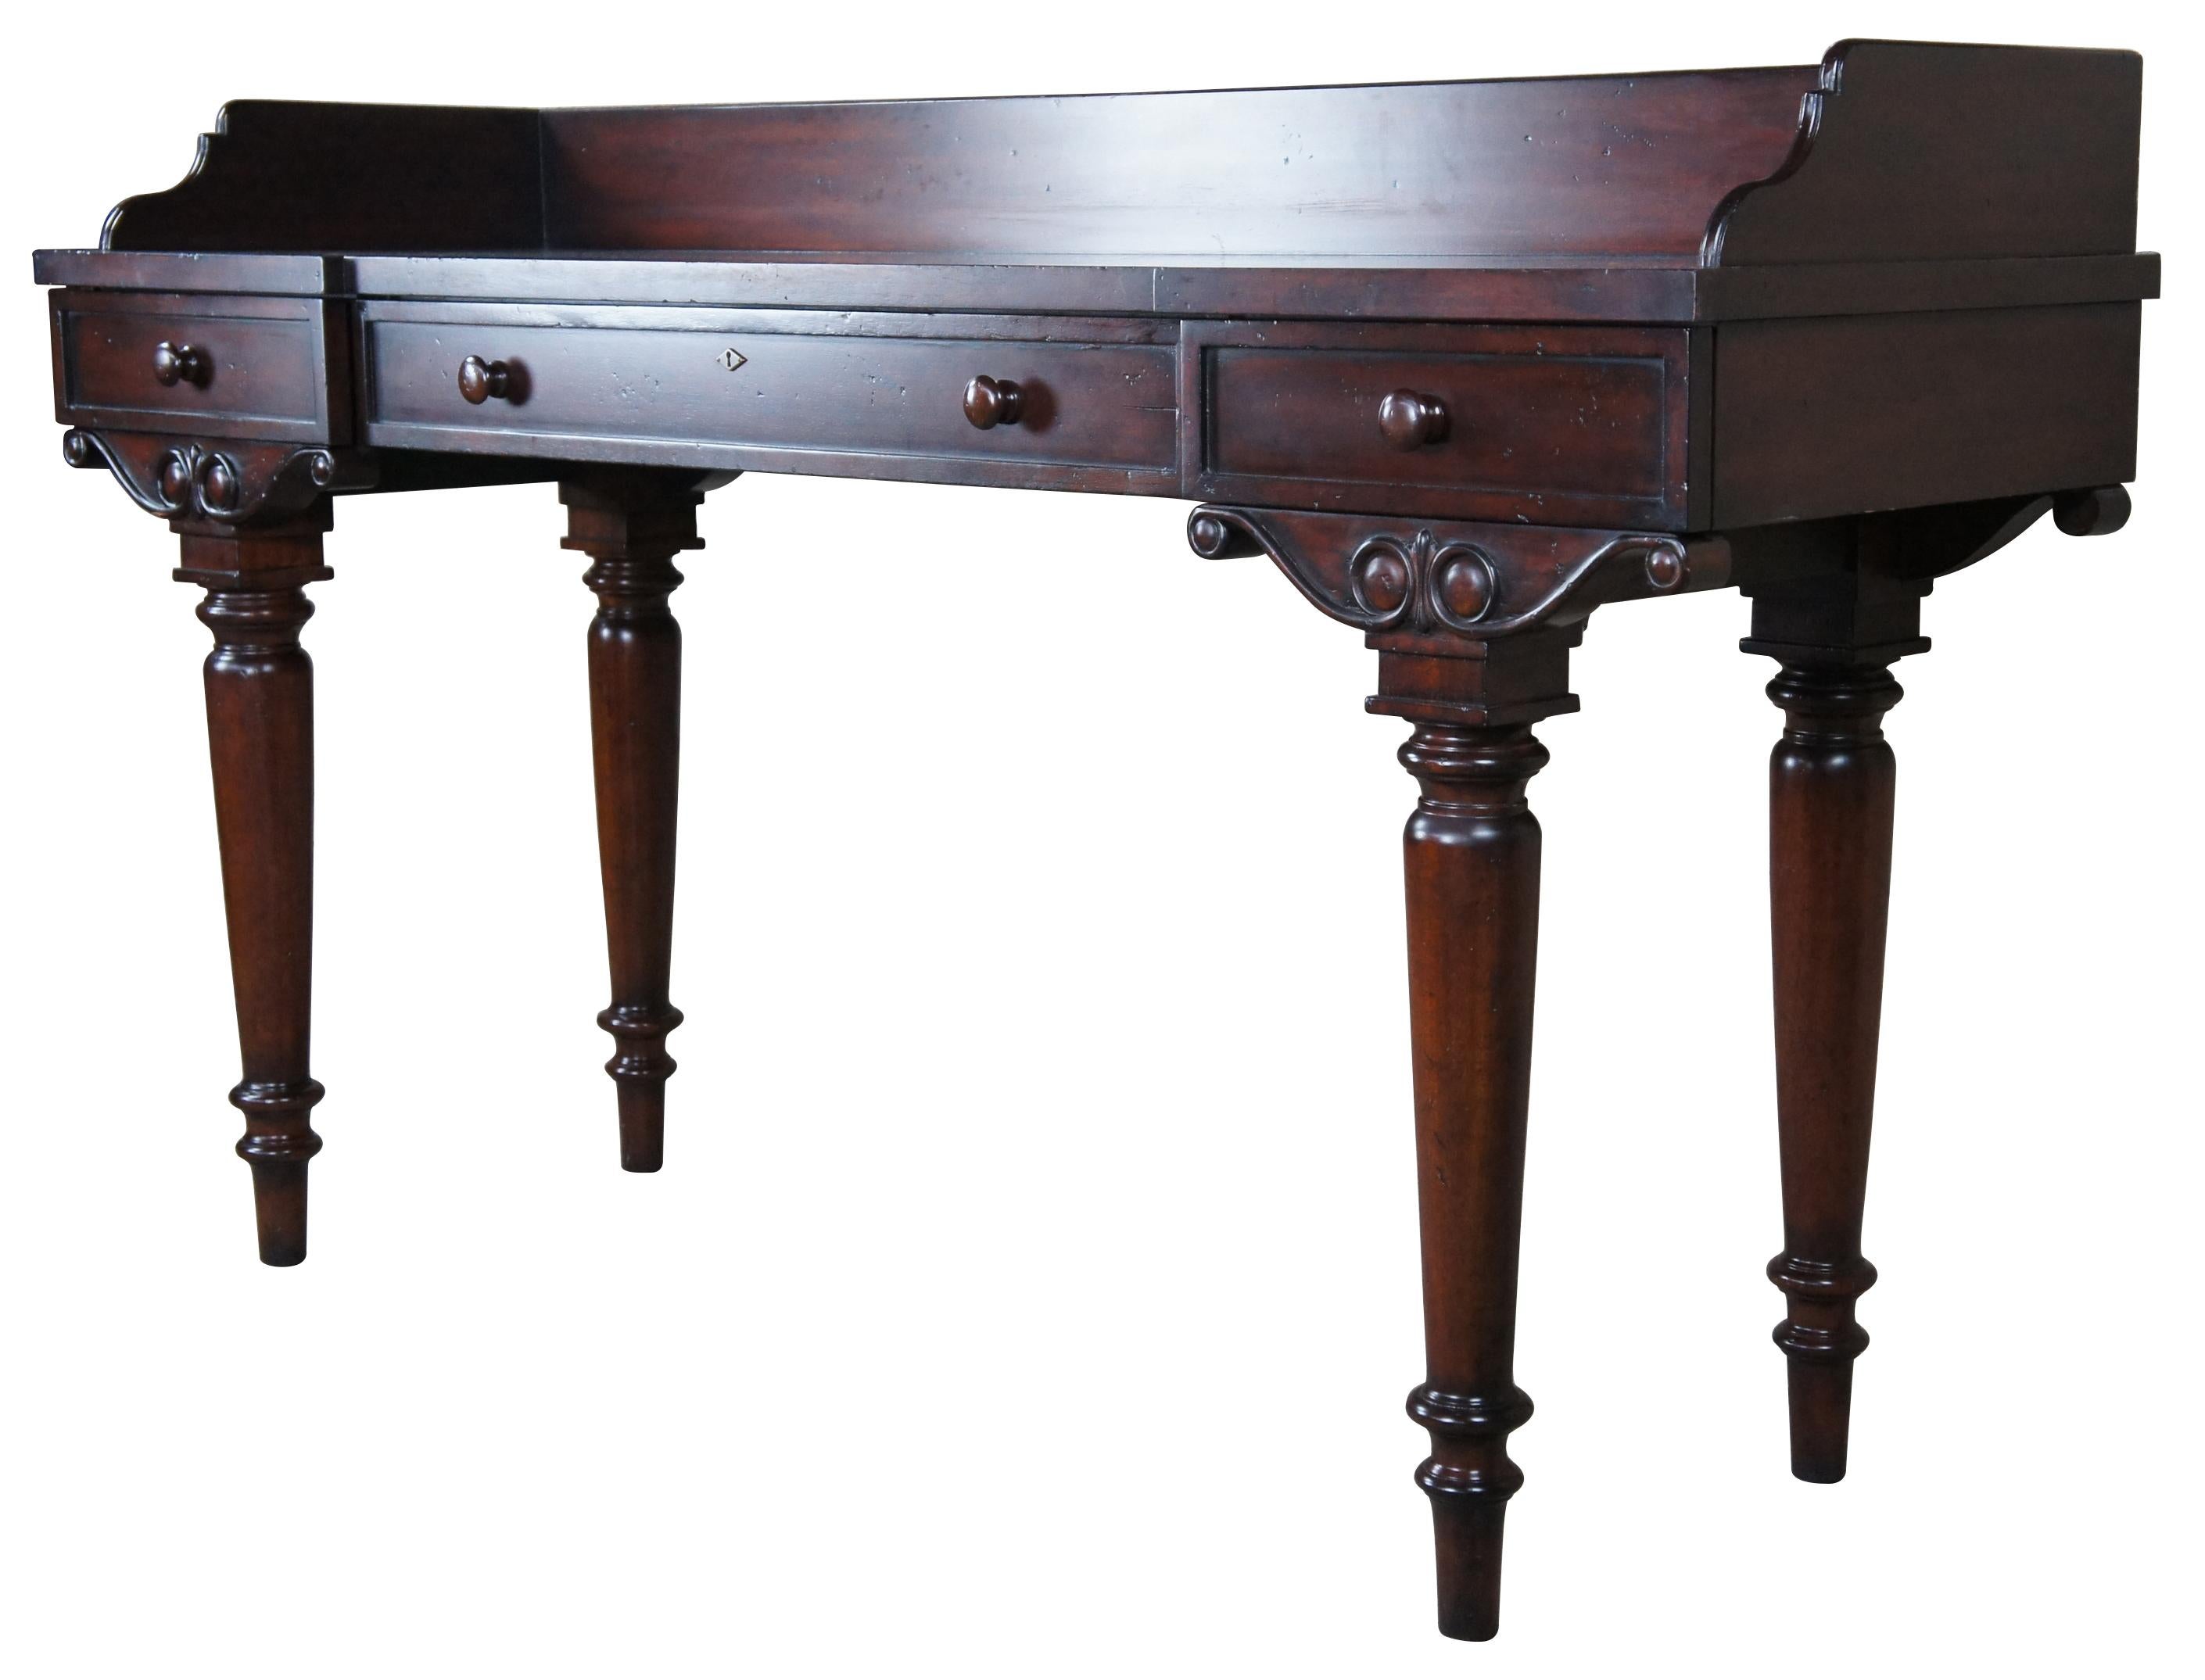 An impressive late 20th Century large-scale mahogany British Colonial inspired server or sideboard. Features a rectangular form topped with an elegant gallery over three drawers. The case is supported by scrolled brackets turned leads leading to